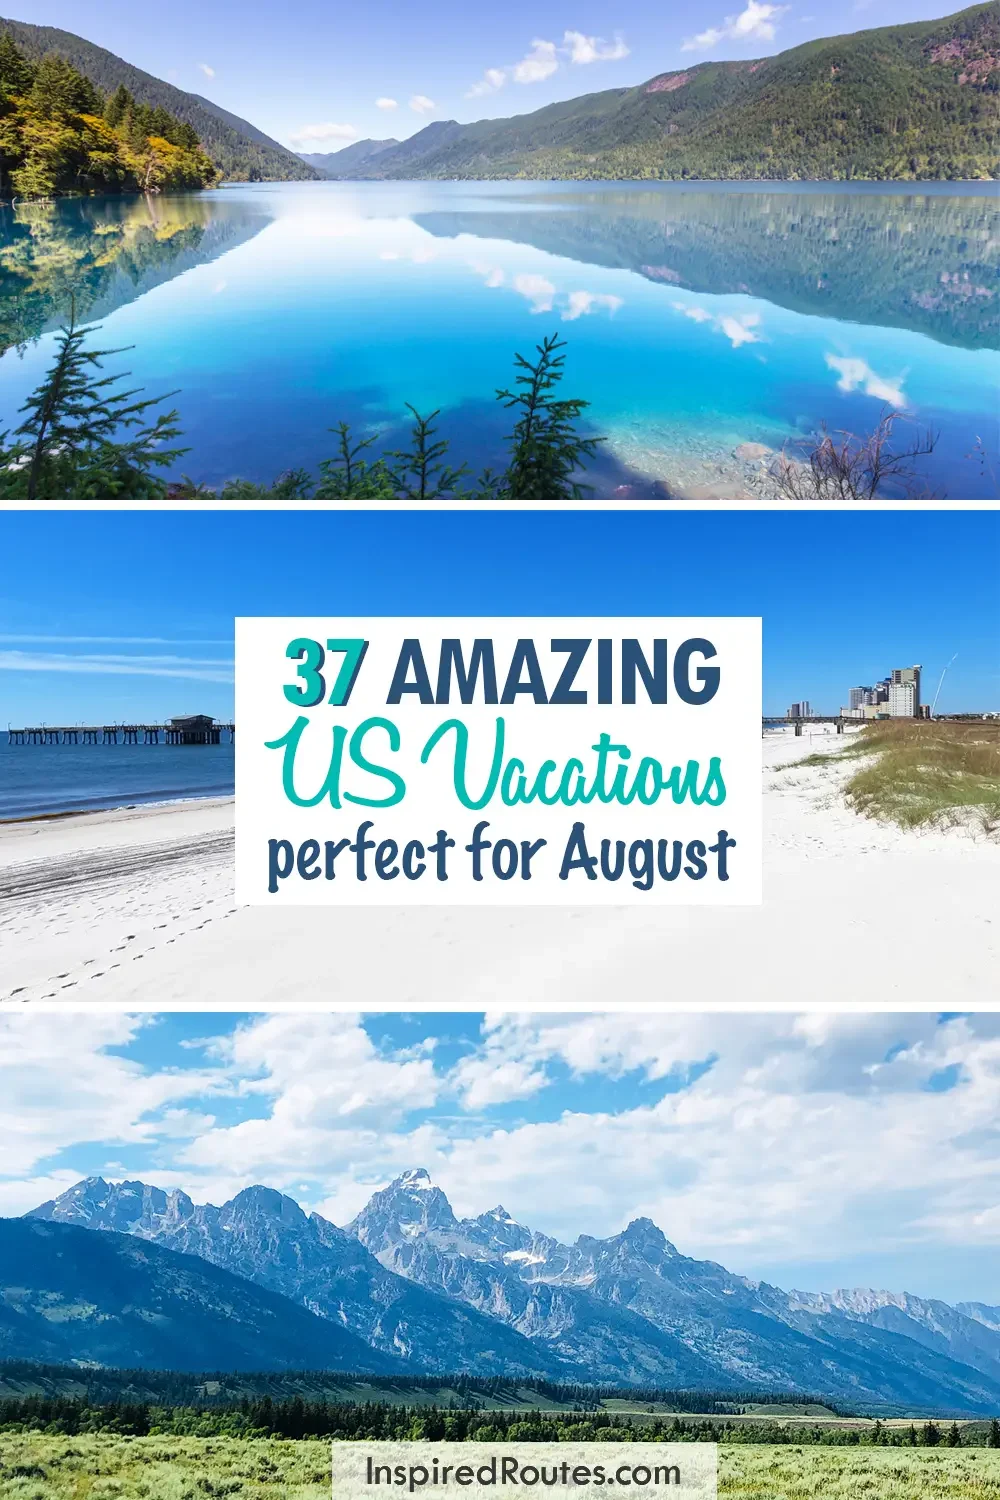 37 amazing US vacations perfect for August with three images of lake beach and mountains